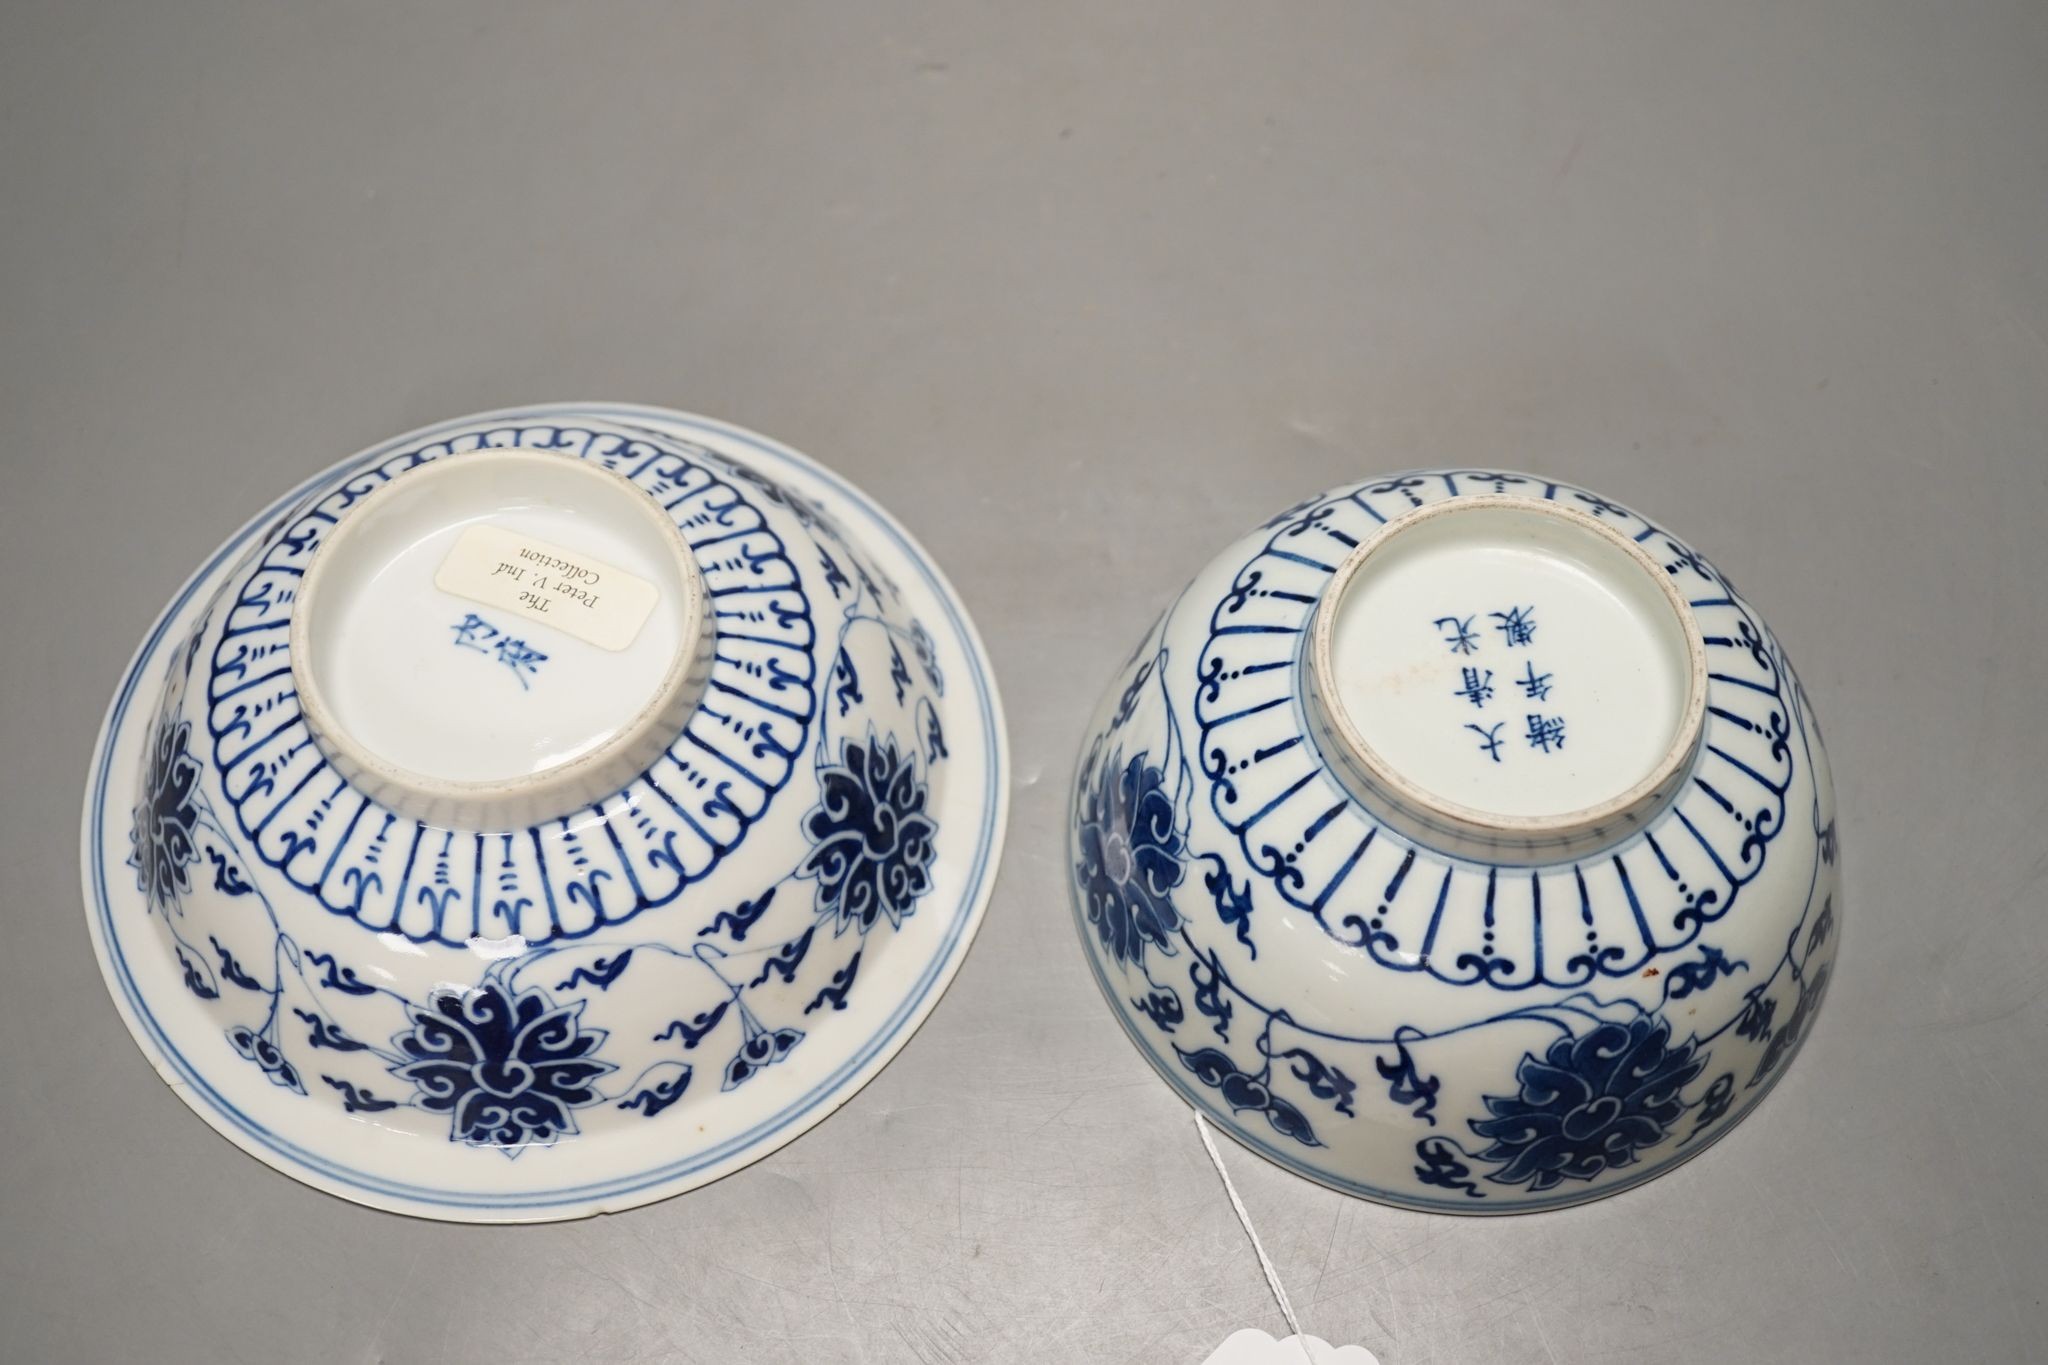 Two Chinese porcelain bowls, painted in underglaze blue, largest 17cm